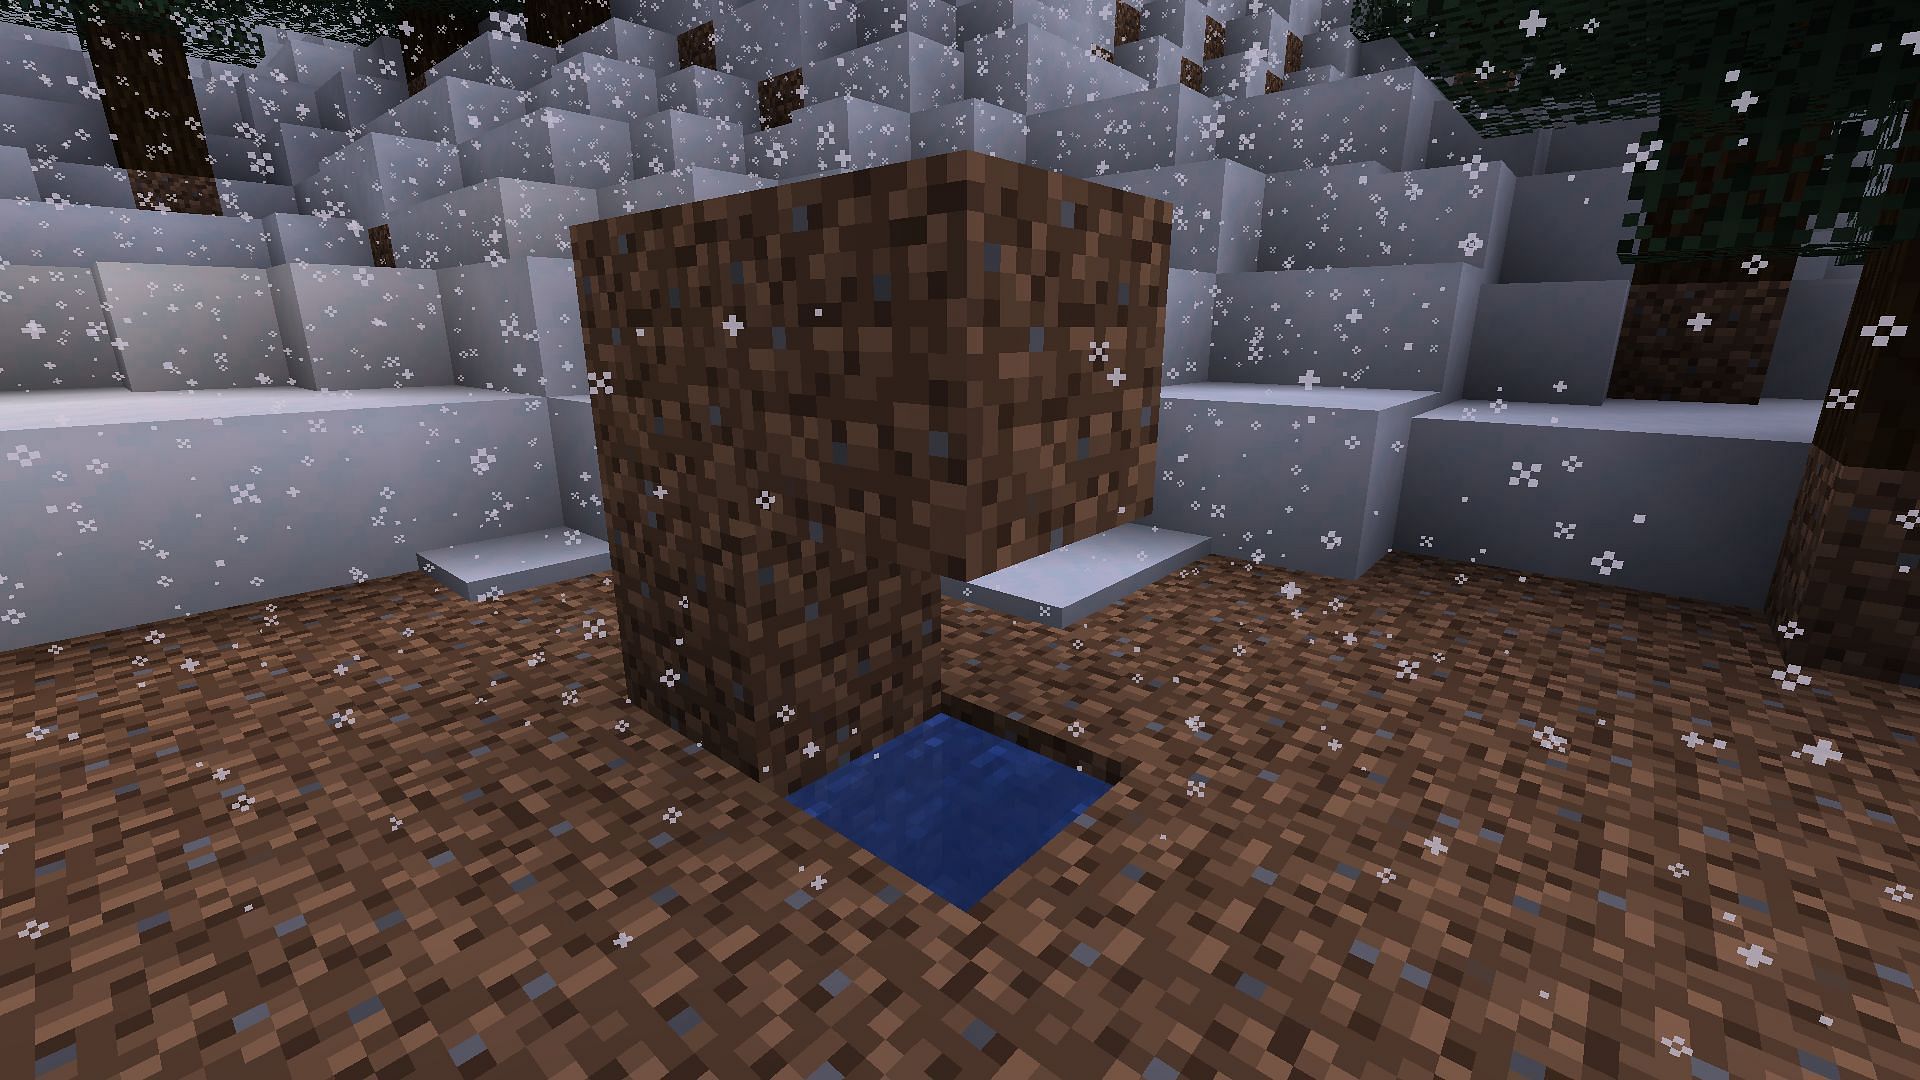 An example of an overhead block keeping water from freezing (Image via Minecraft)